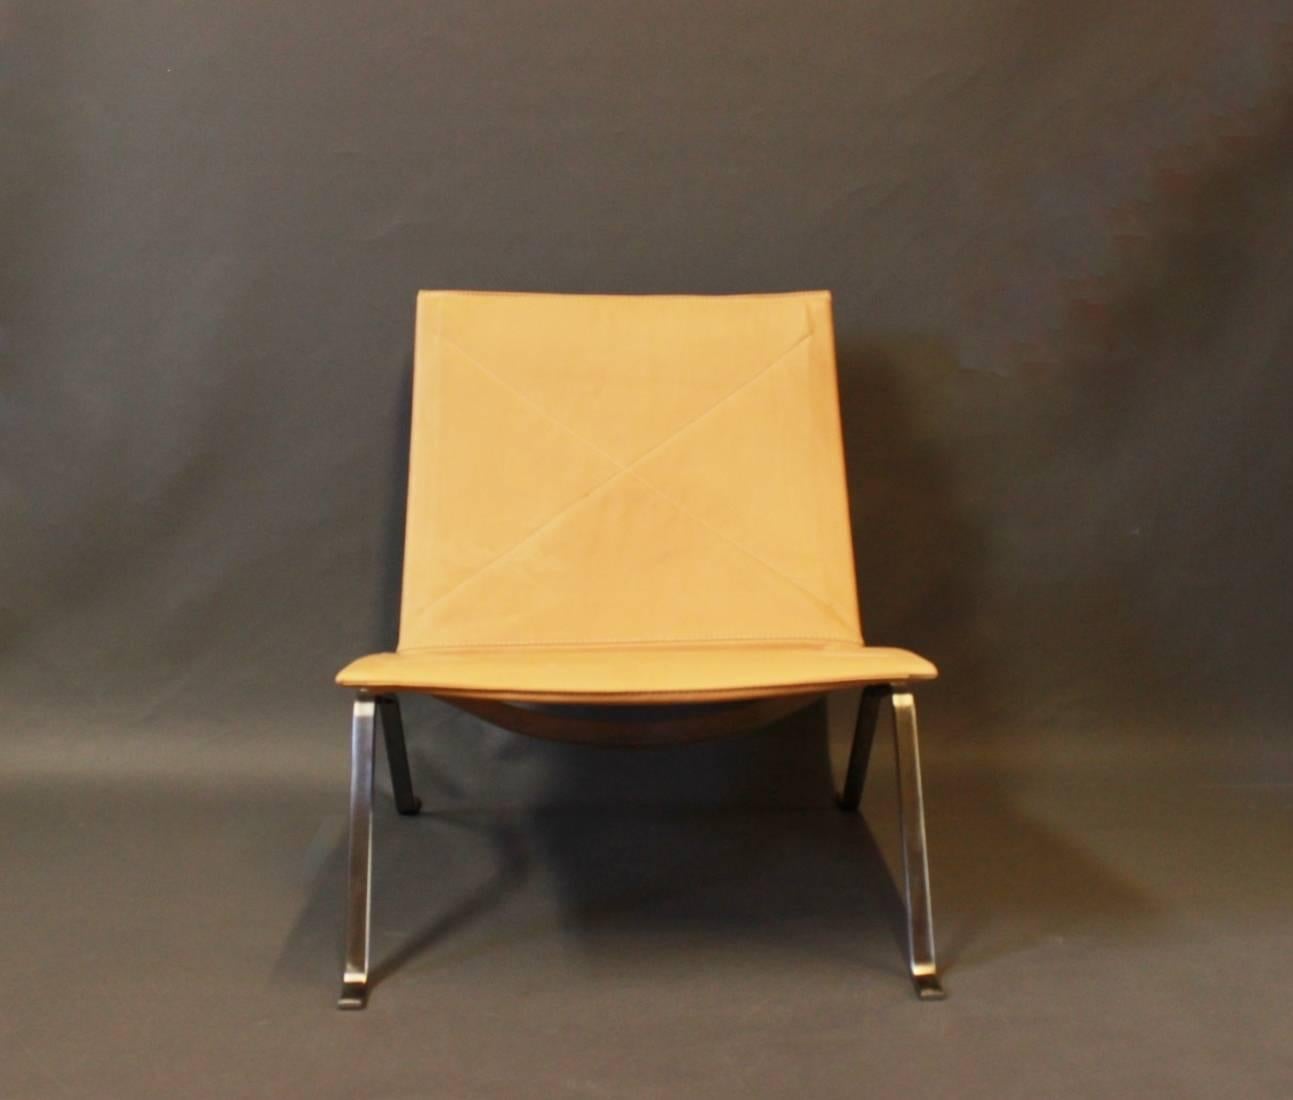 A PK22 easy chair designed by Poul Kjærholm in 1955 and manufactured in the 1970s. The chair is with light natural leather and frame of chrome.